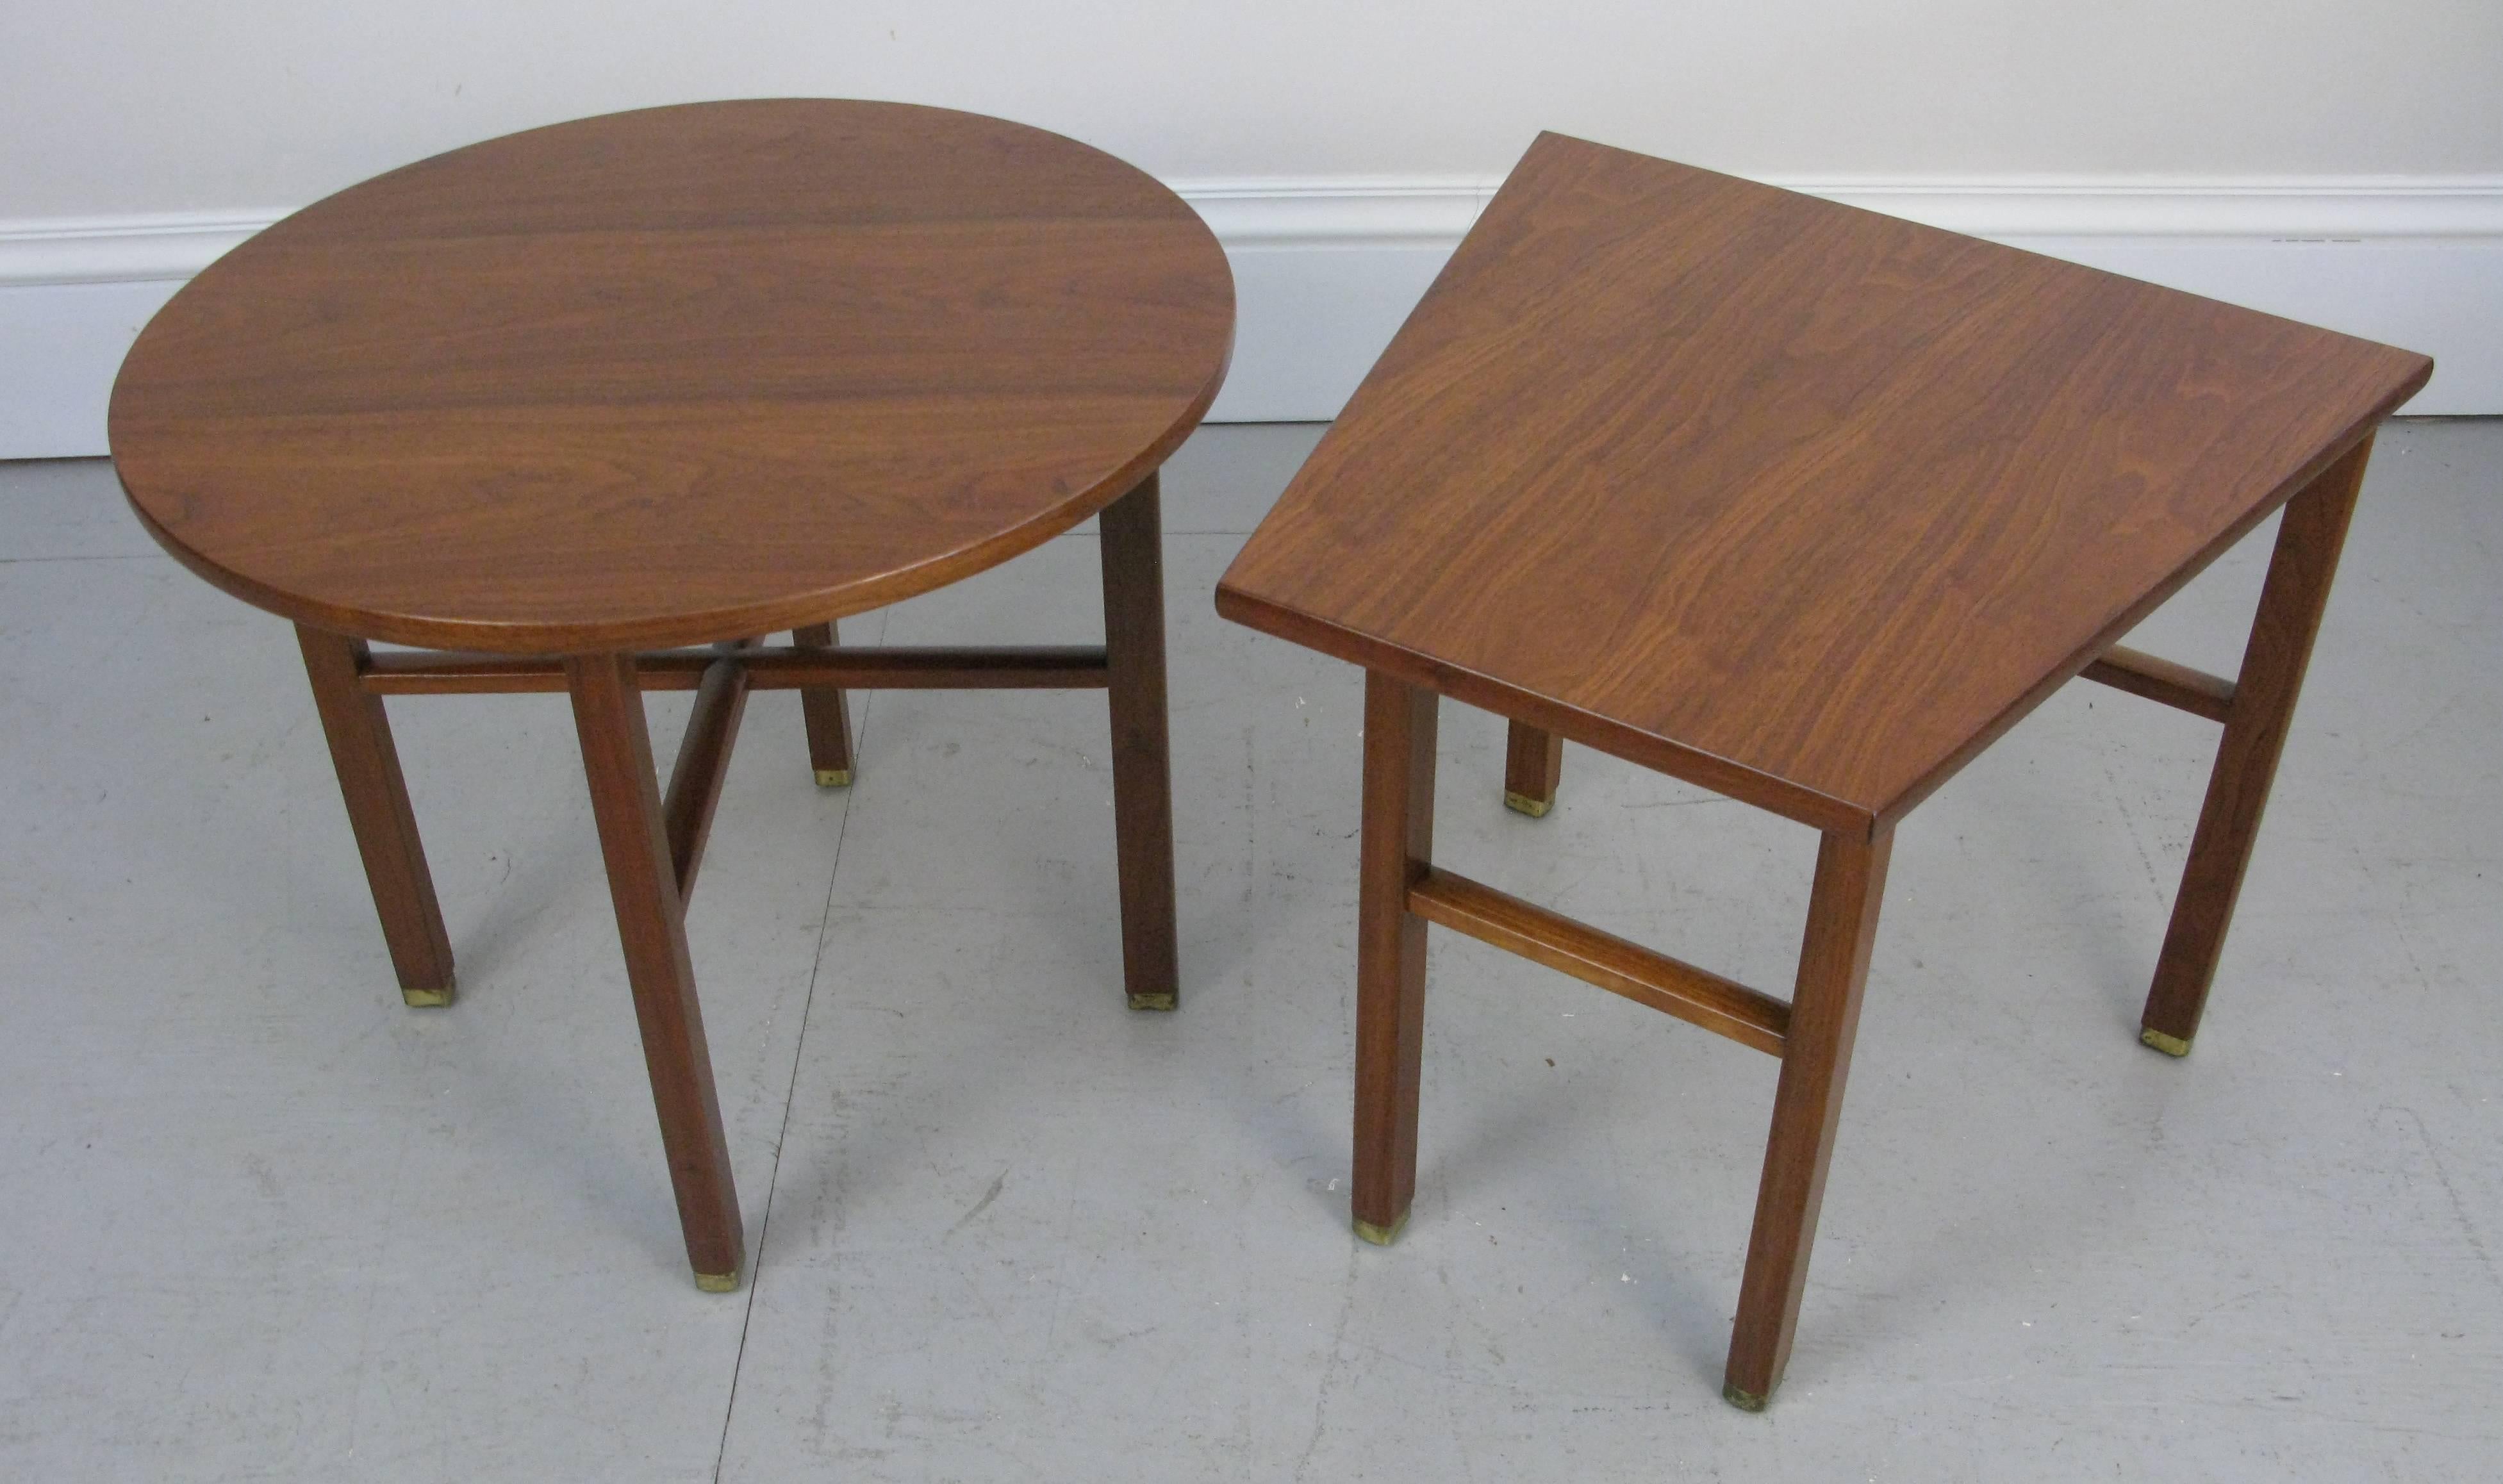 These two 1950s end or side tables had been used as a pair on either end of a sofa. The geometry of the two shapes is wonderful. The walnut has been newly finished.